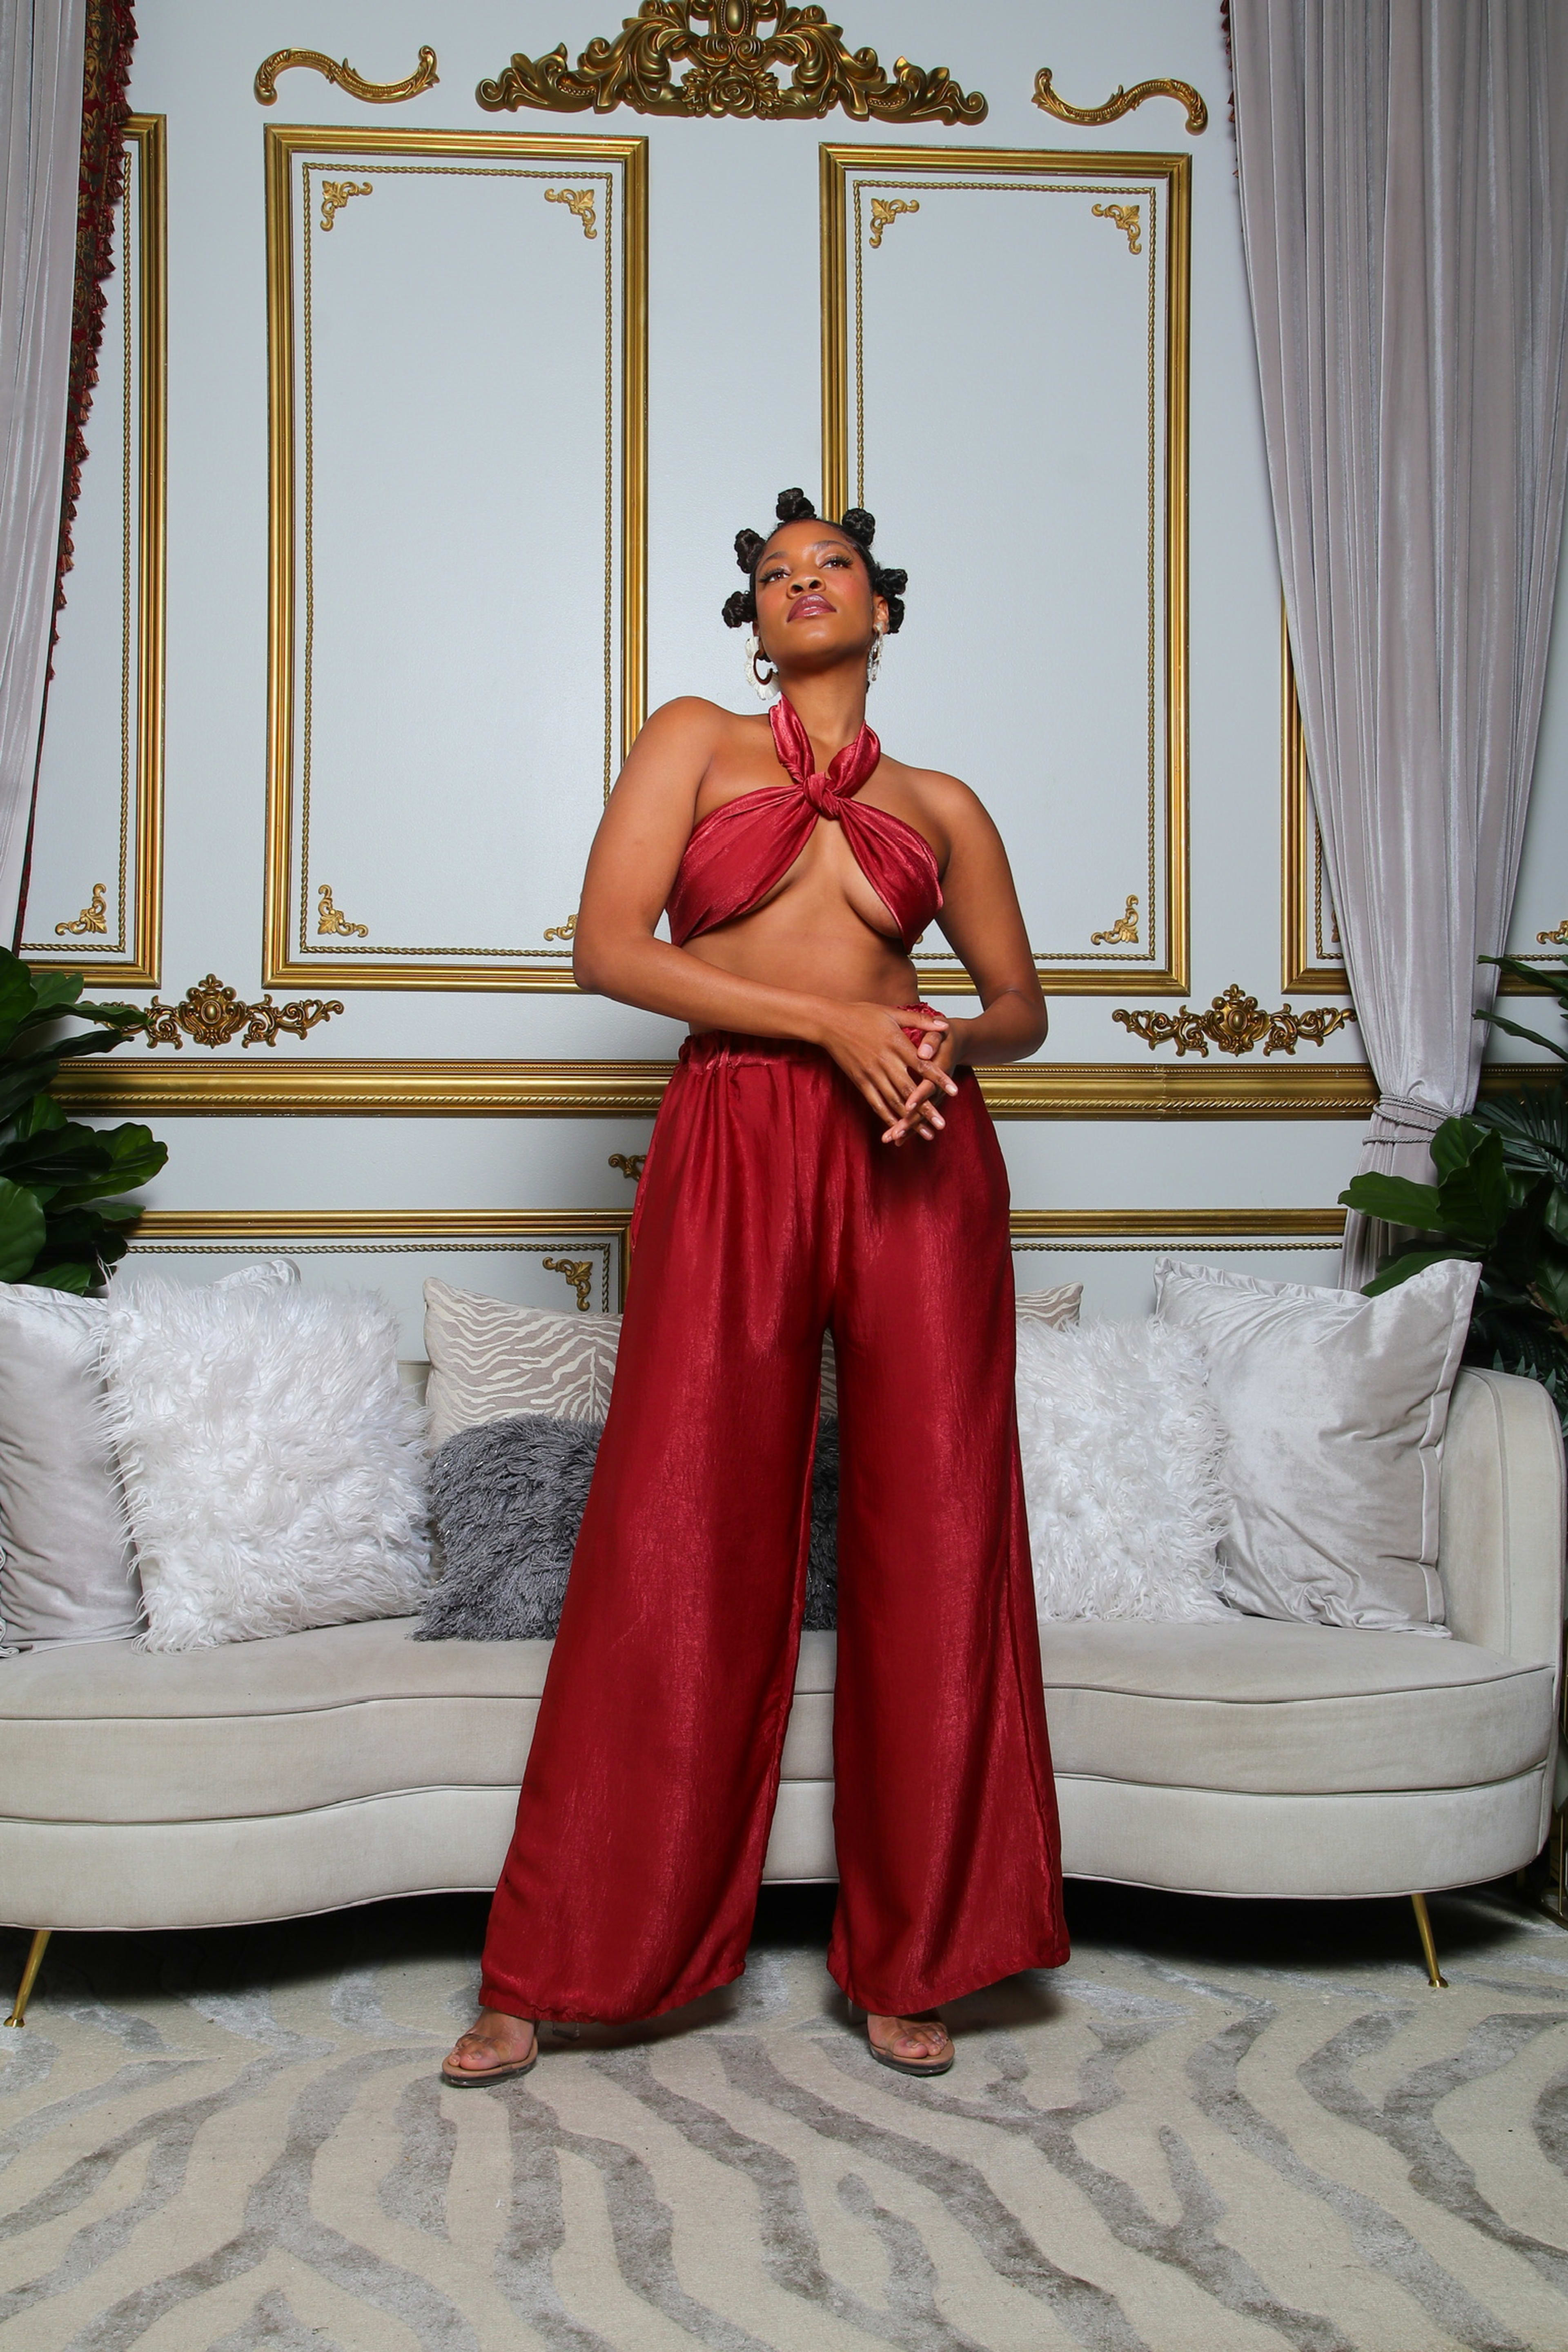 A fashion-conscious woman wearing red strikes a pose in front of a couch during her photoshoot.